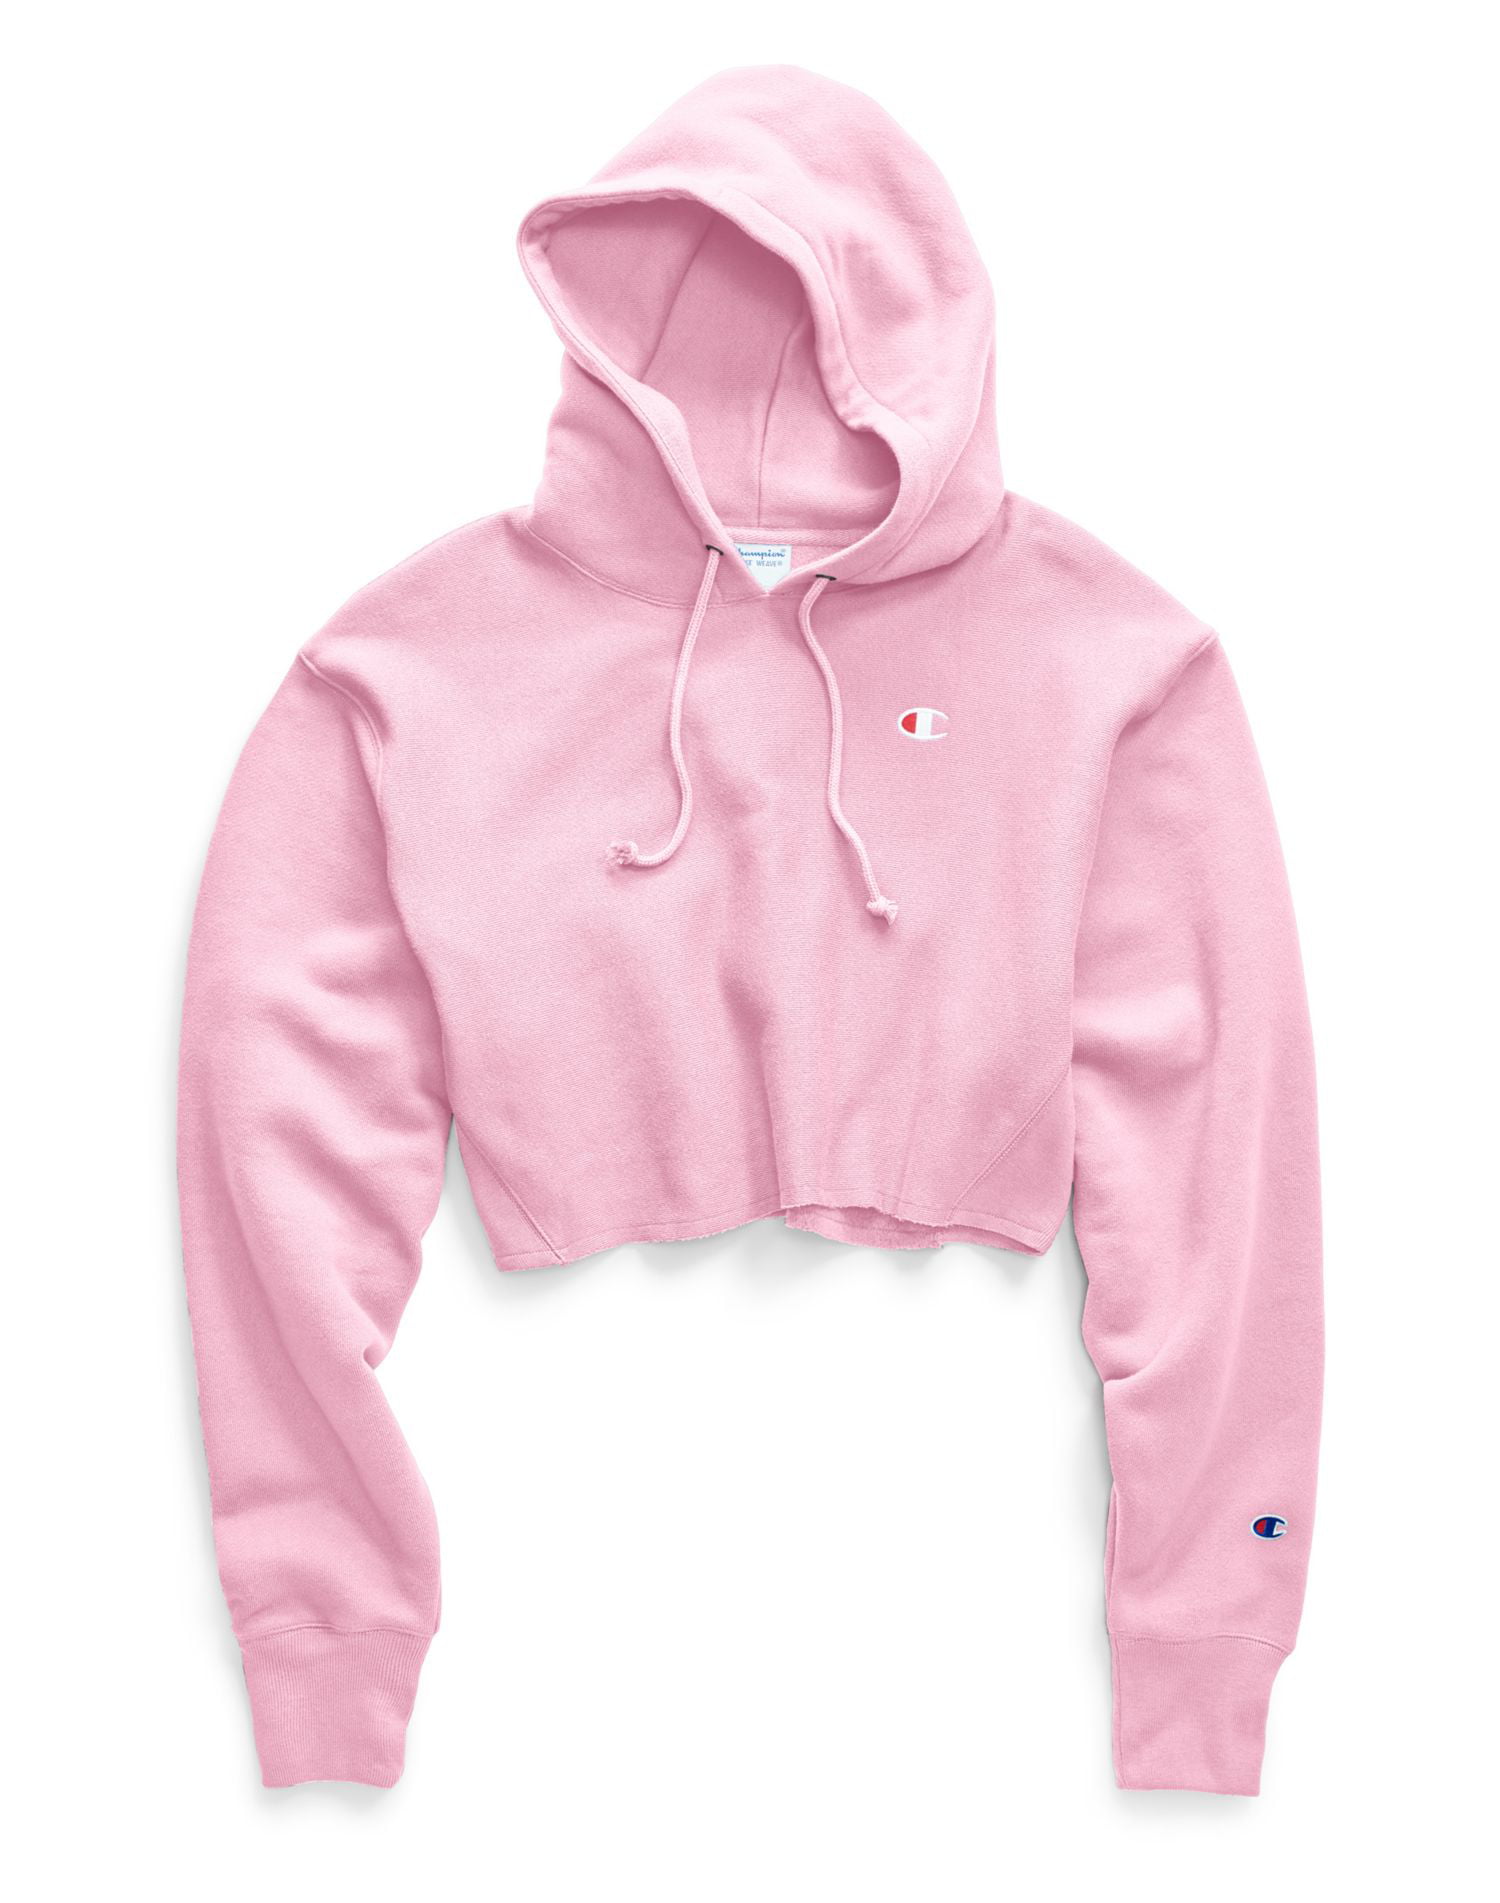 pink champion hoodie cropped